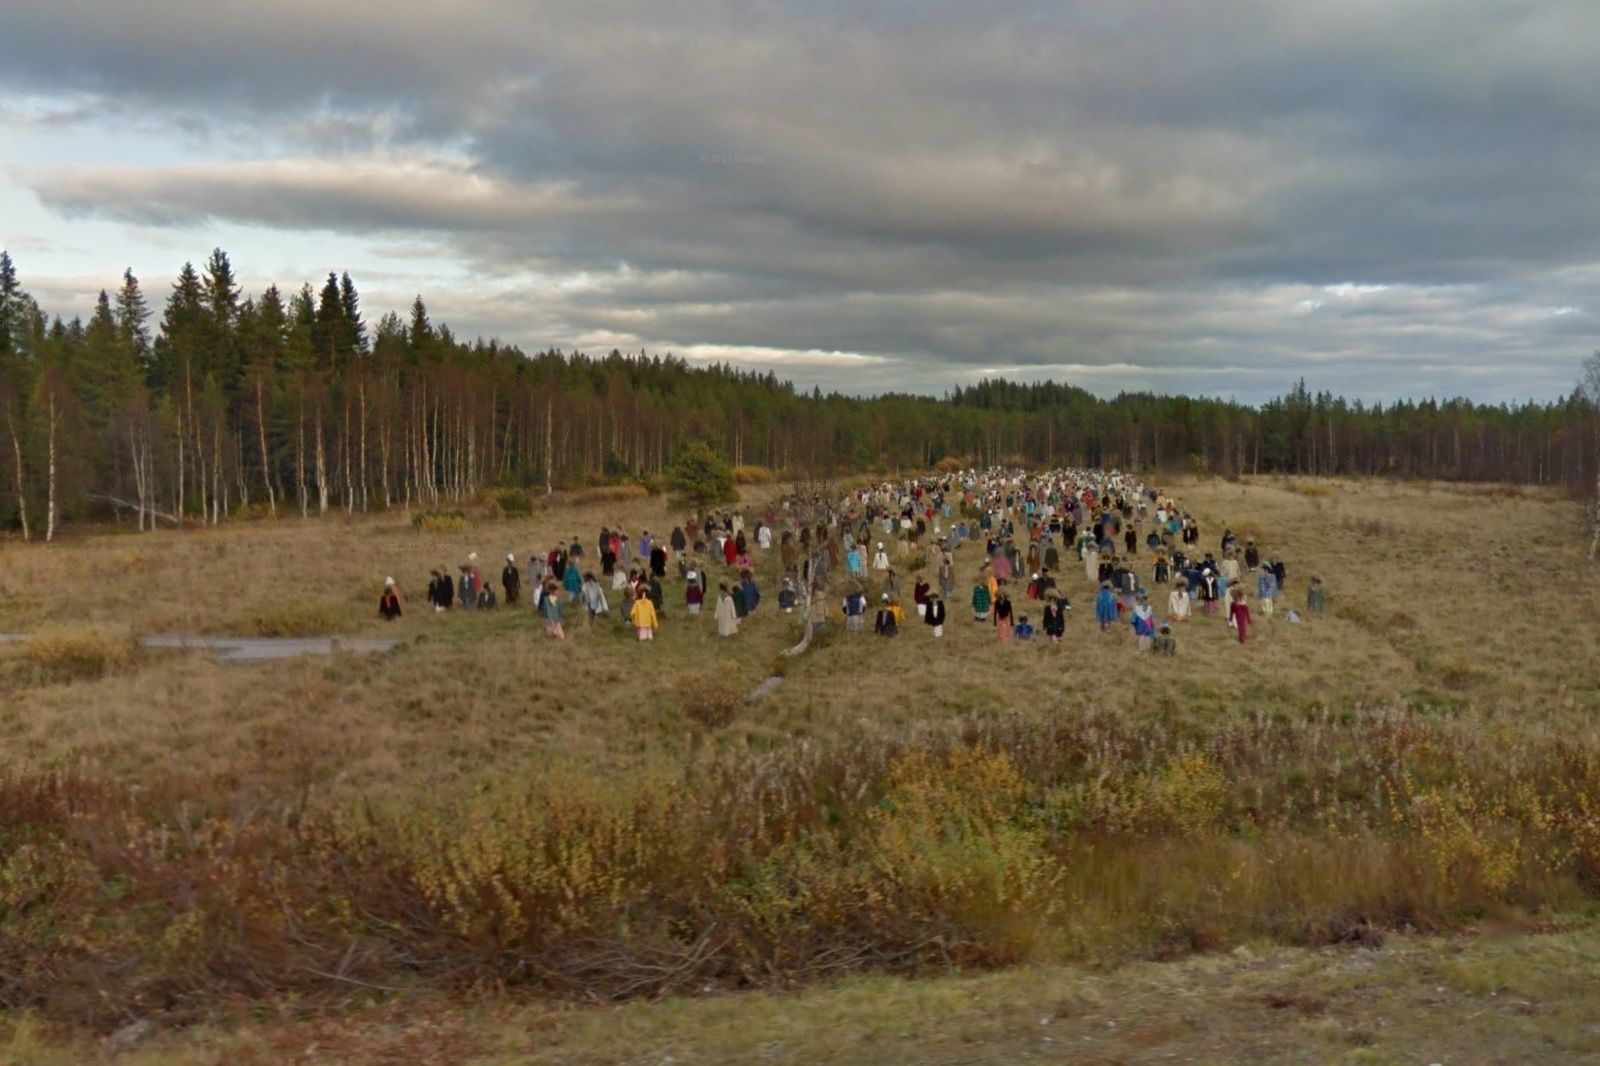 Brilliant views from around the world captured by Street View image 10